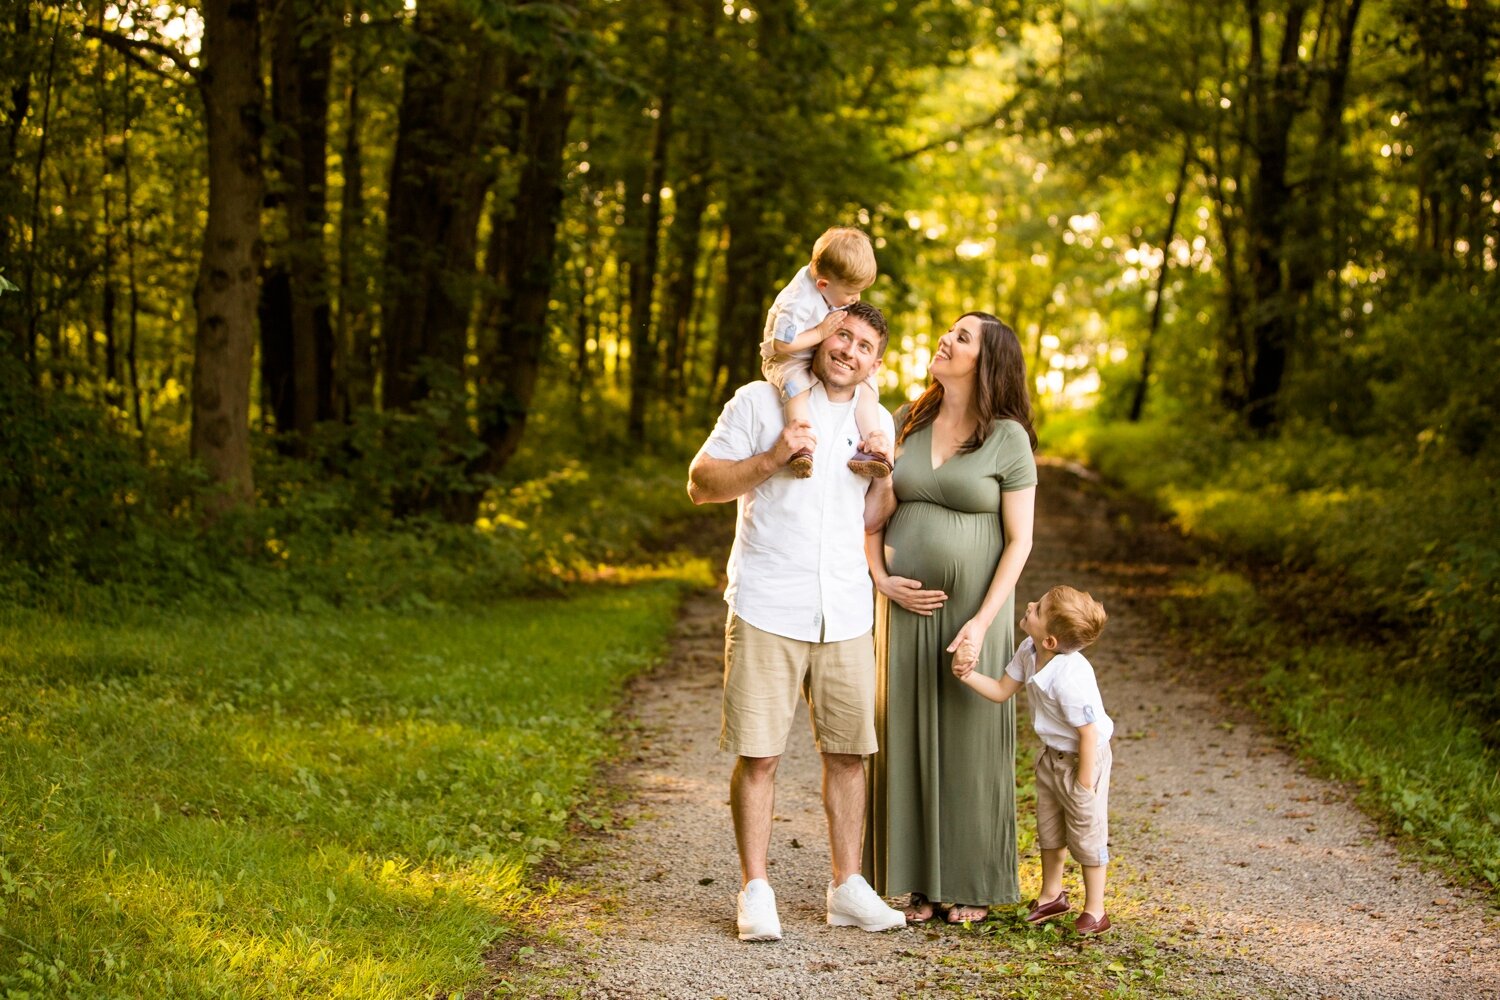 location ideas for photo sessions near cranberry township and zelienople, cranberry township photographer, zelienople photographer, north pittsburgh photographer, moraine state park photos